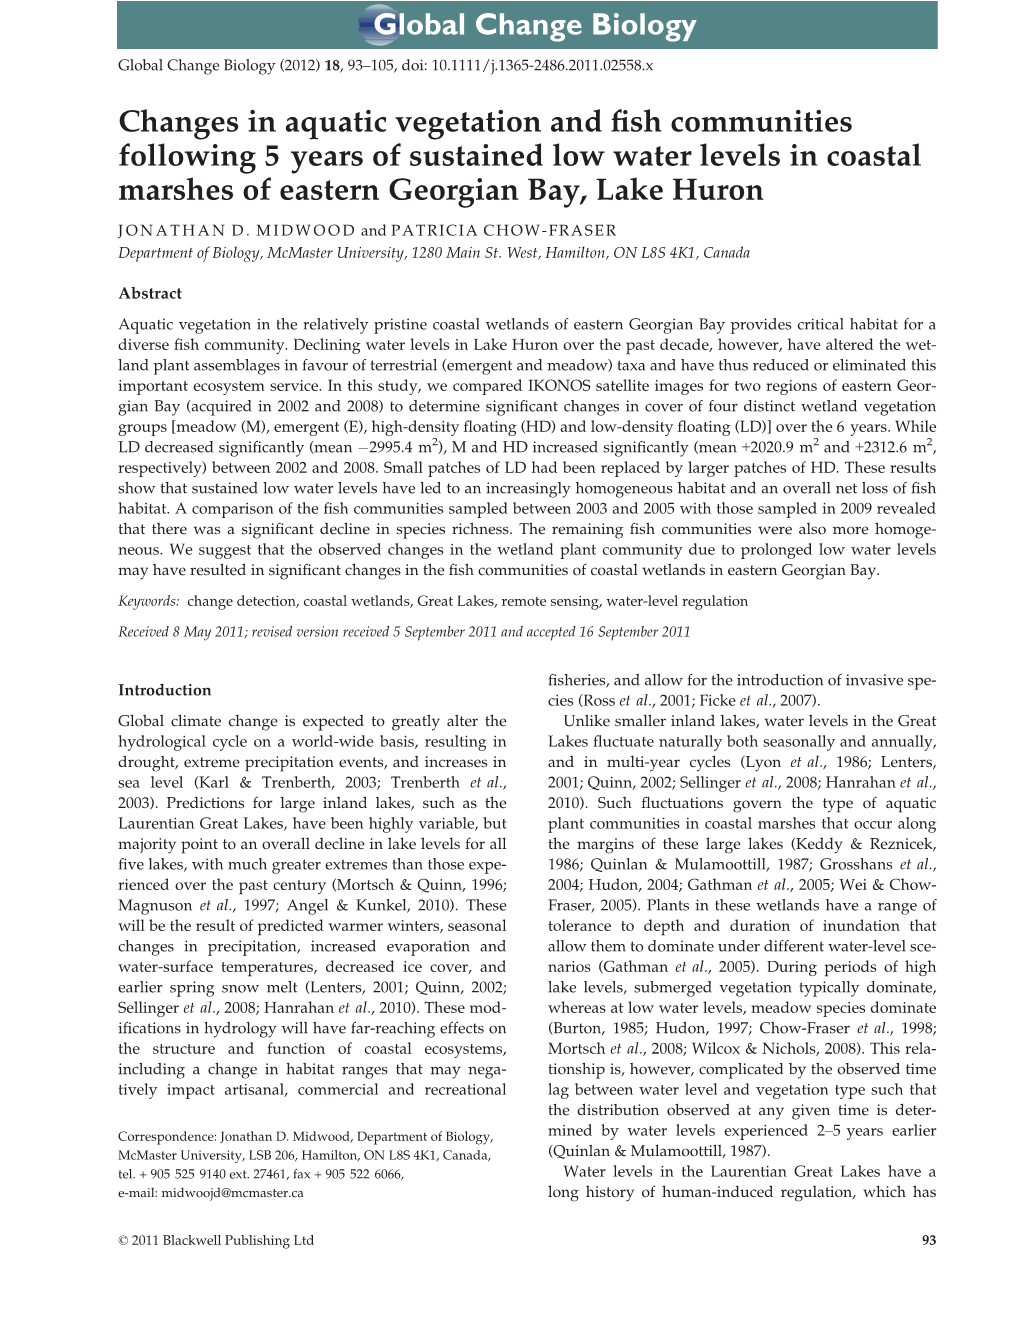 Changes in Aquatic Vegetation and Fish Communities Following 5Years